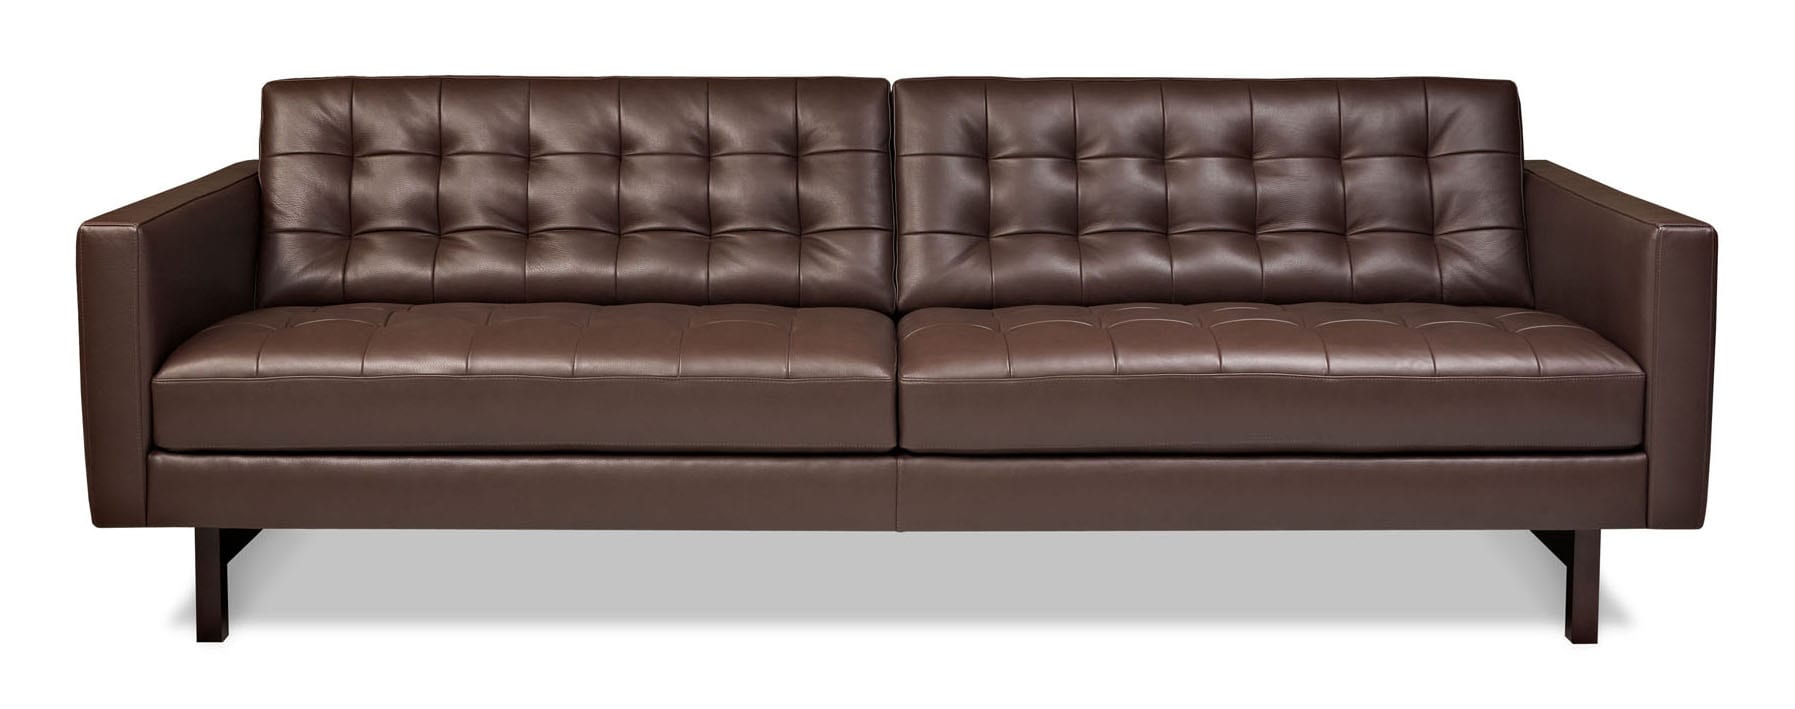 american leather parker sofa